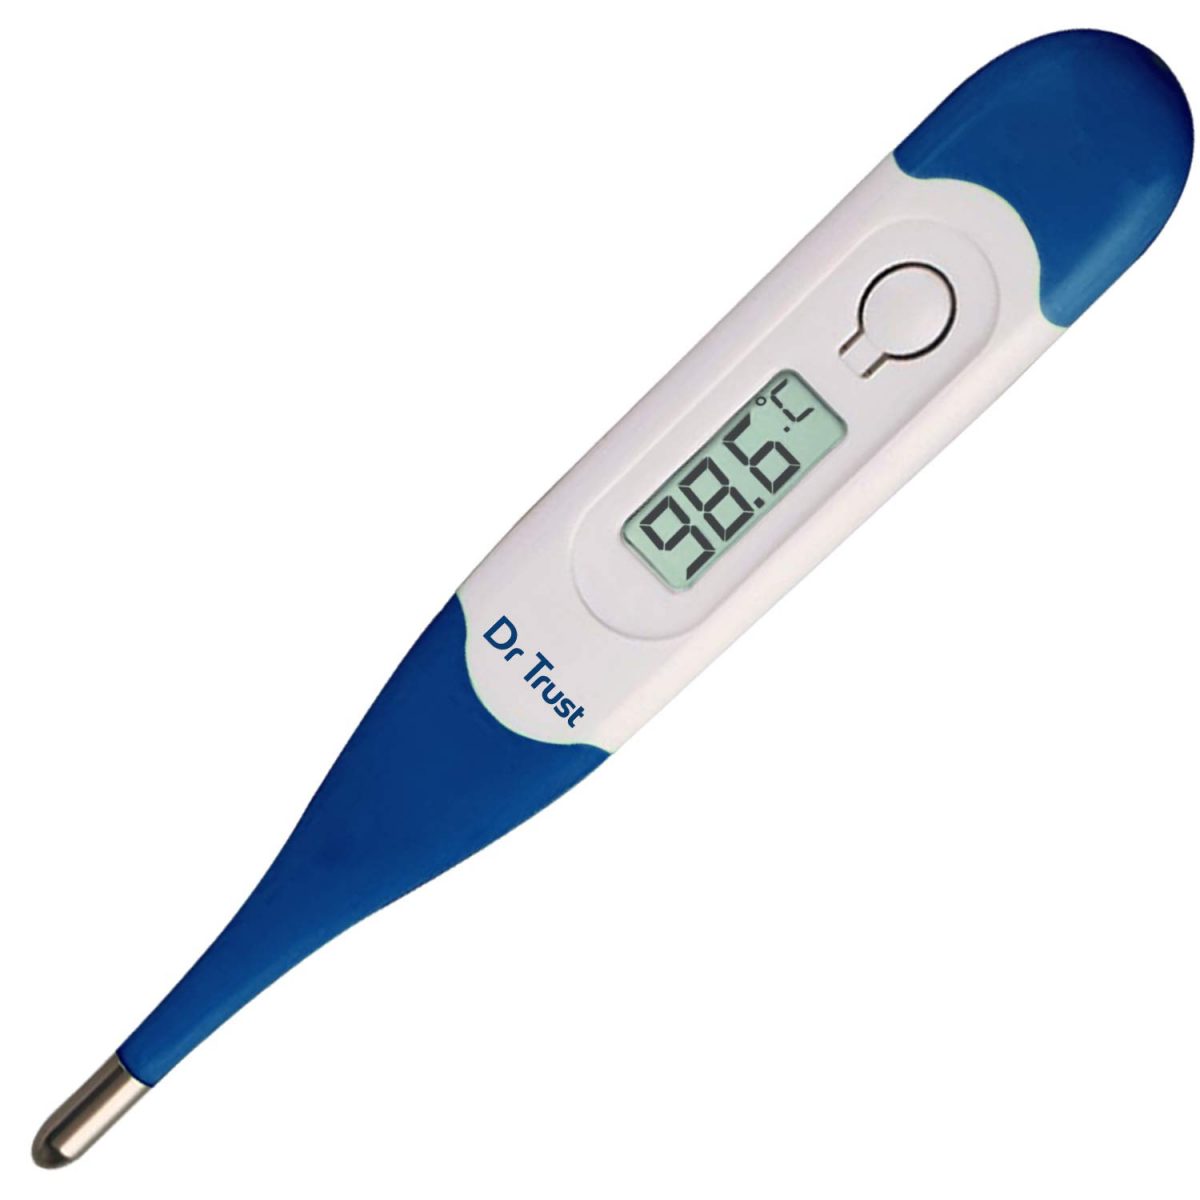 Do digital thermometers stop working?